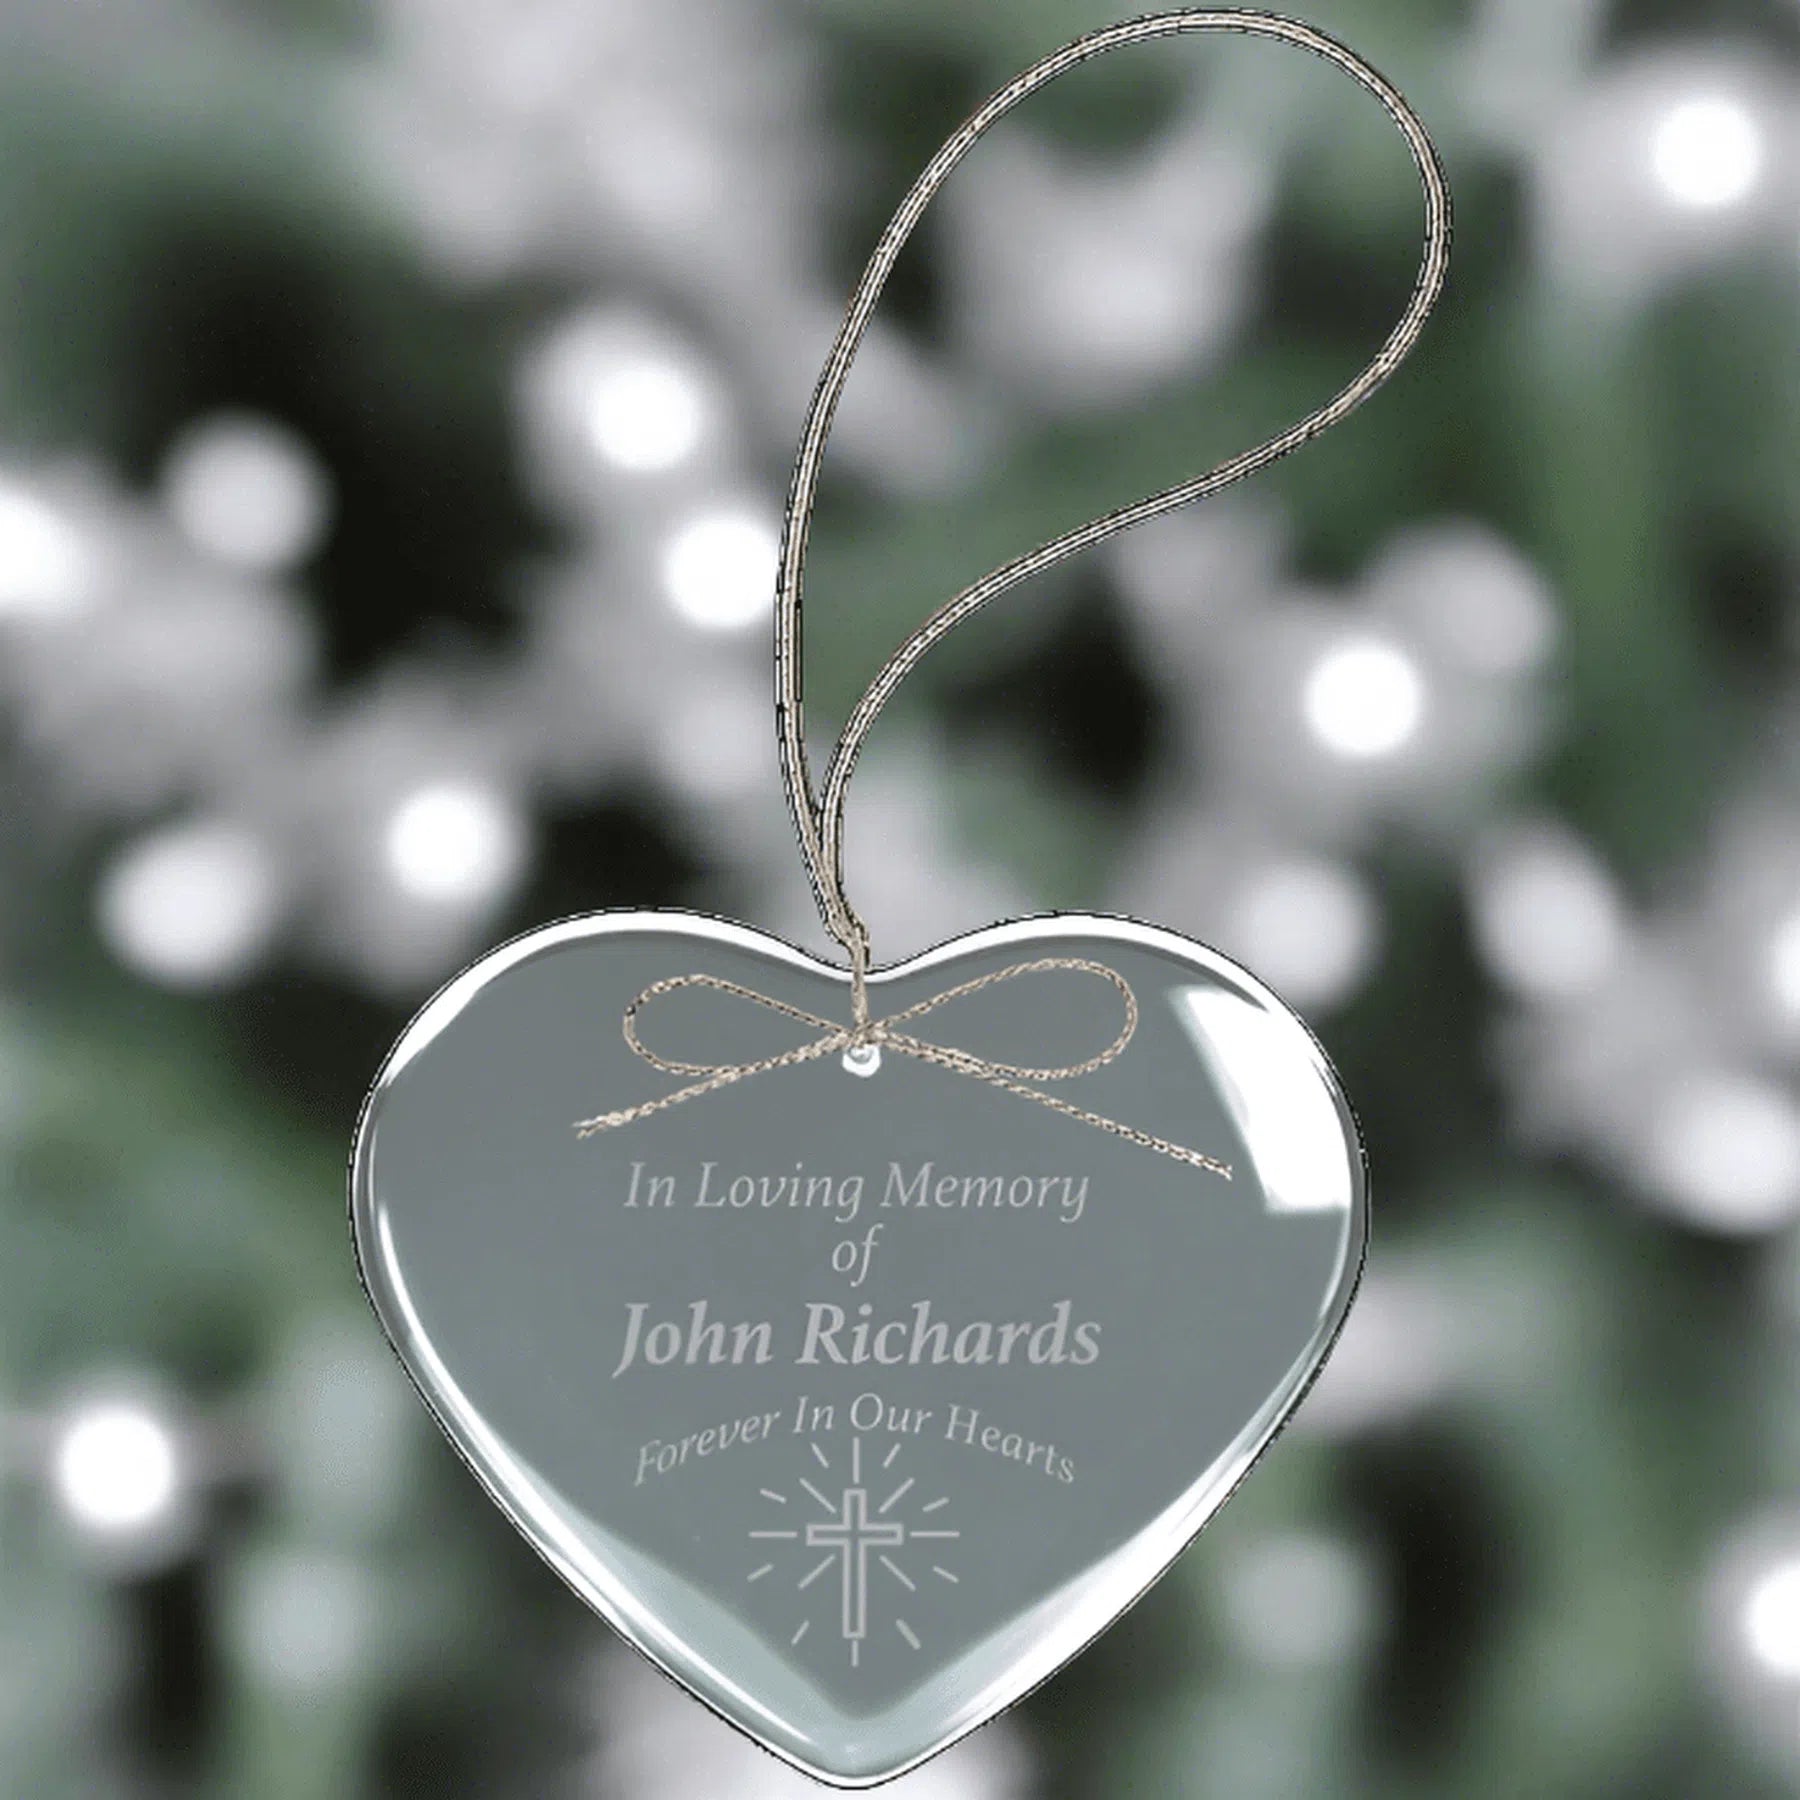 3" Crystal Heart Ornament with Silver String